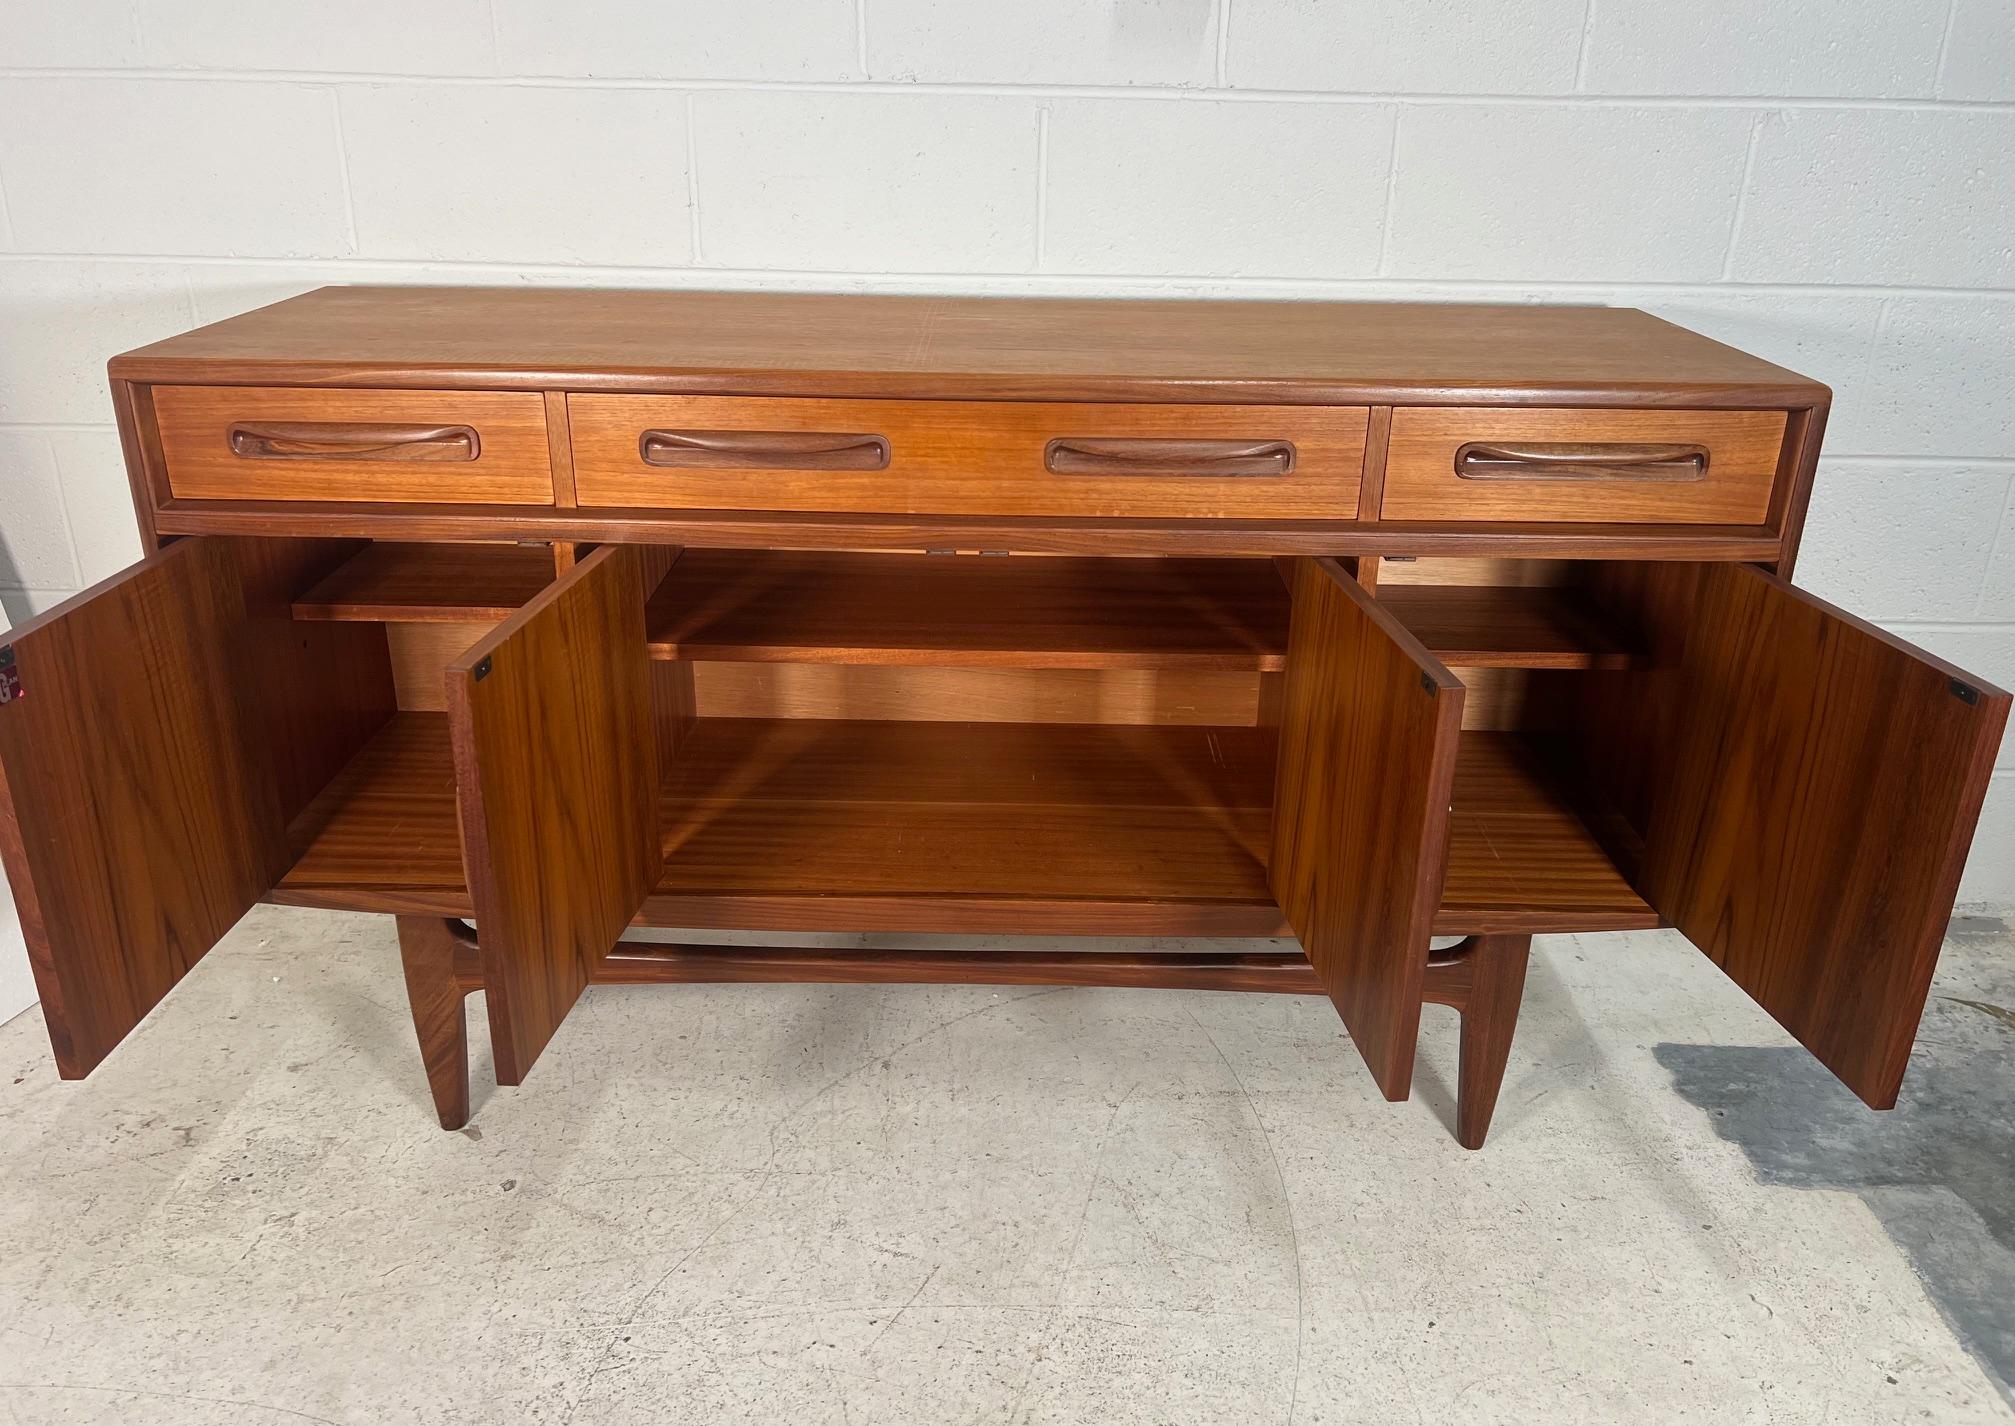 Outstanding small teak credenza. It was designed in the 1960s by Victor Bramwell Wilkins for G Plan's Fresco Range. It has original grey baize and wood dividers in the top drawer. Adjustable shelves inside the cabinets.
The back is unfinished.
Very